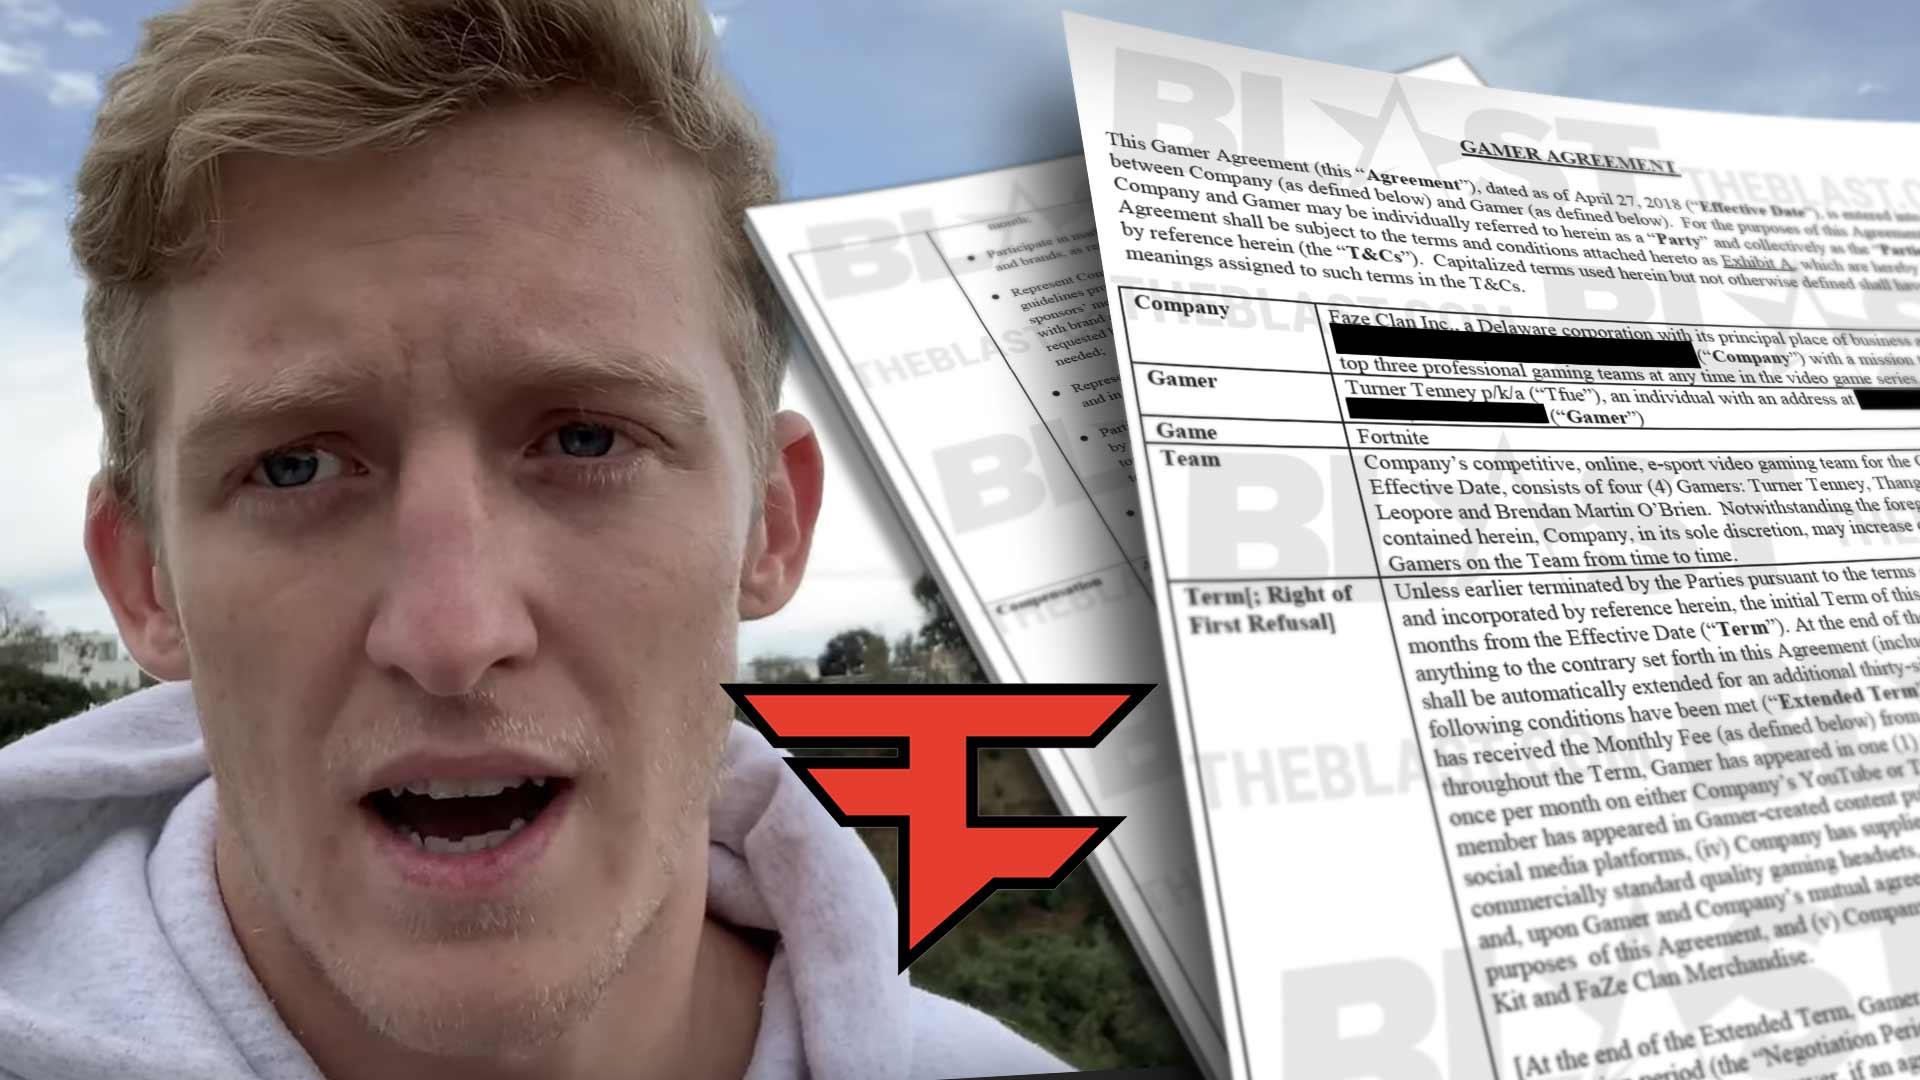 ‘Fortnite’ Gamer Tfue’s Contract with FaZe Clan Finally Revealed!